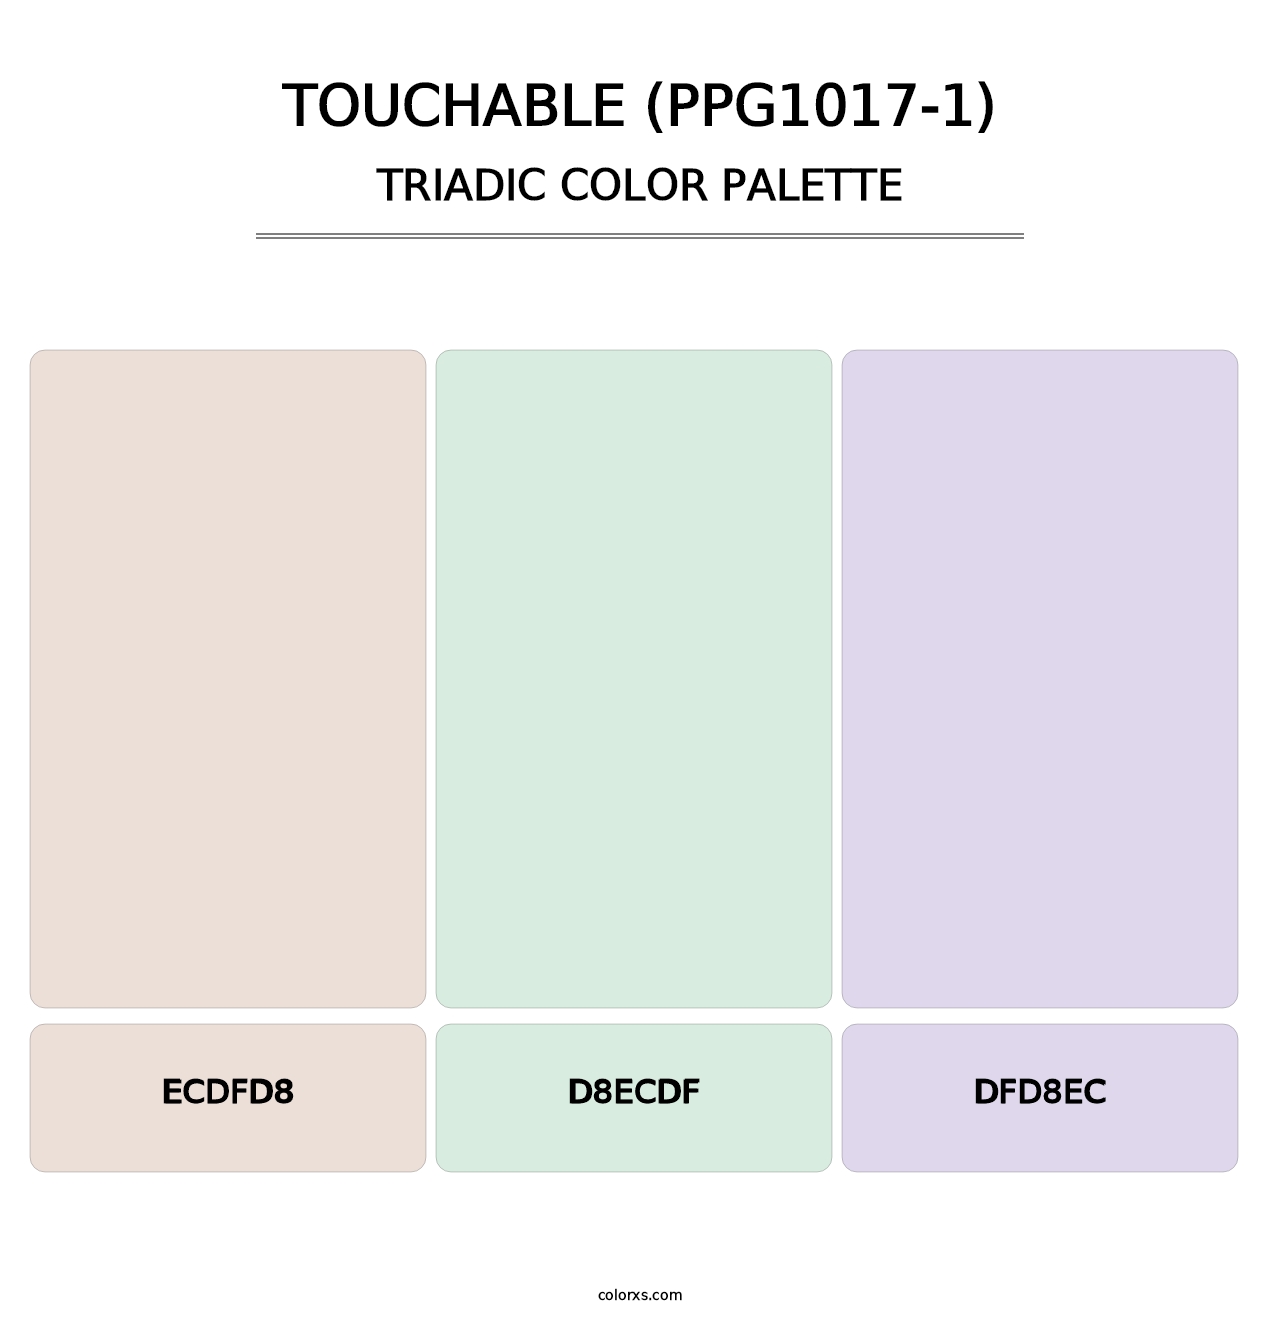 Touchable (PPG1017-1) - Triadic Color Palette